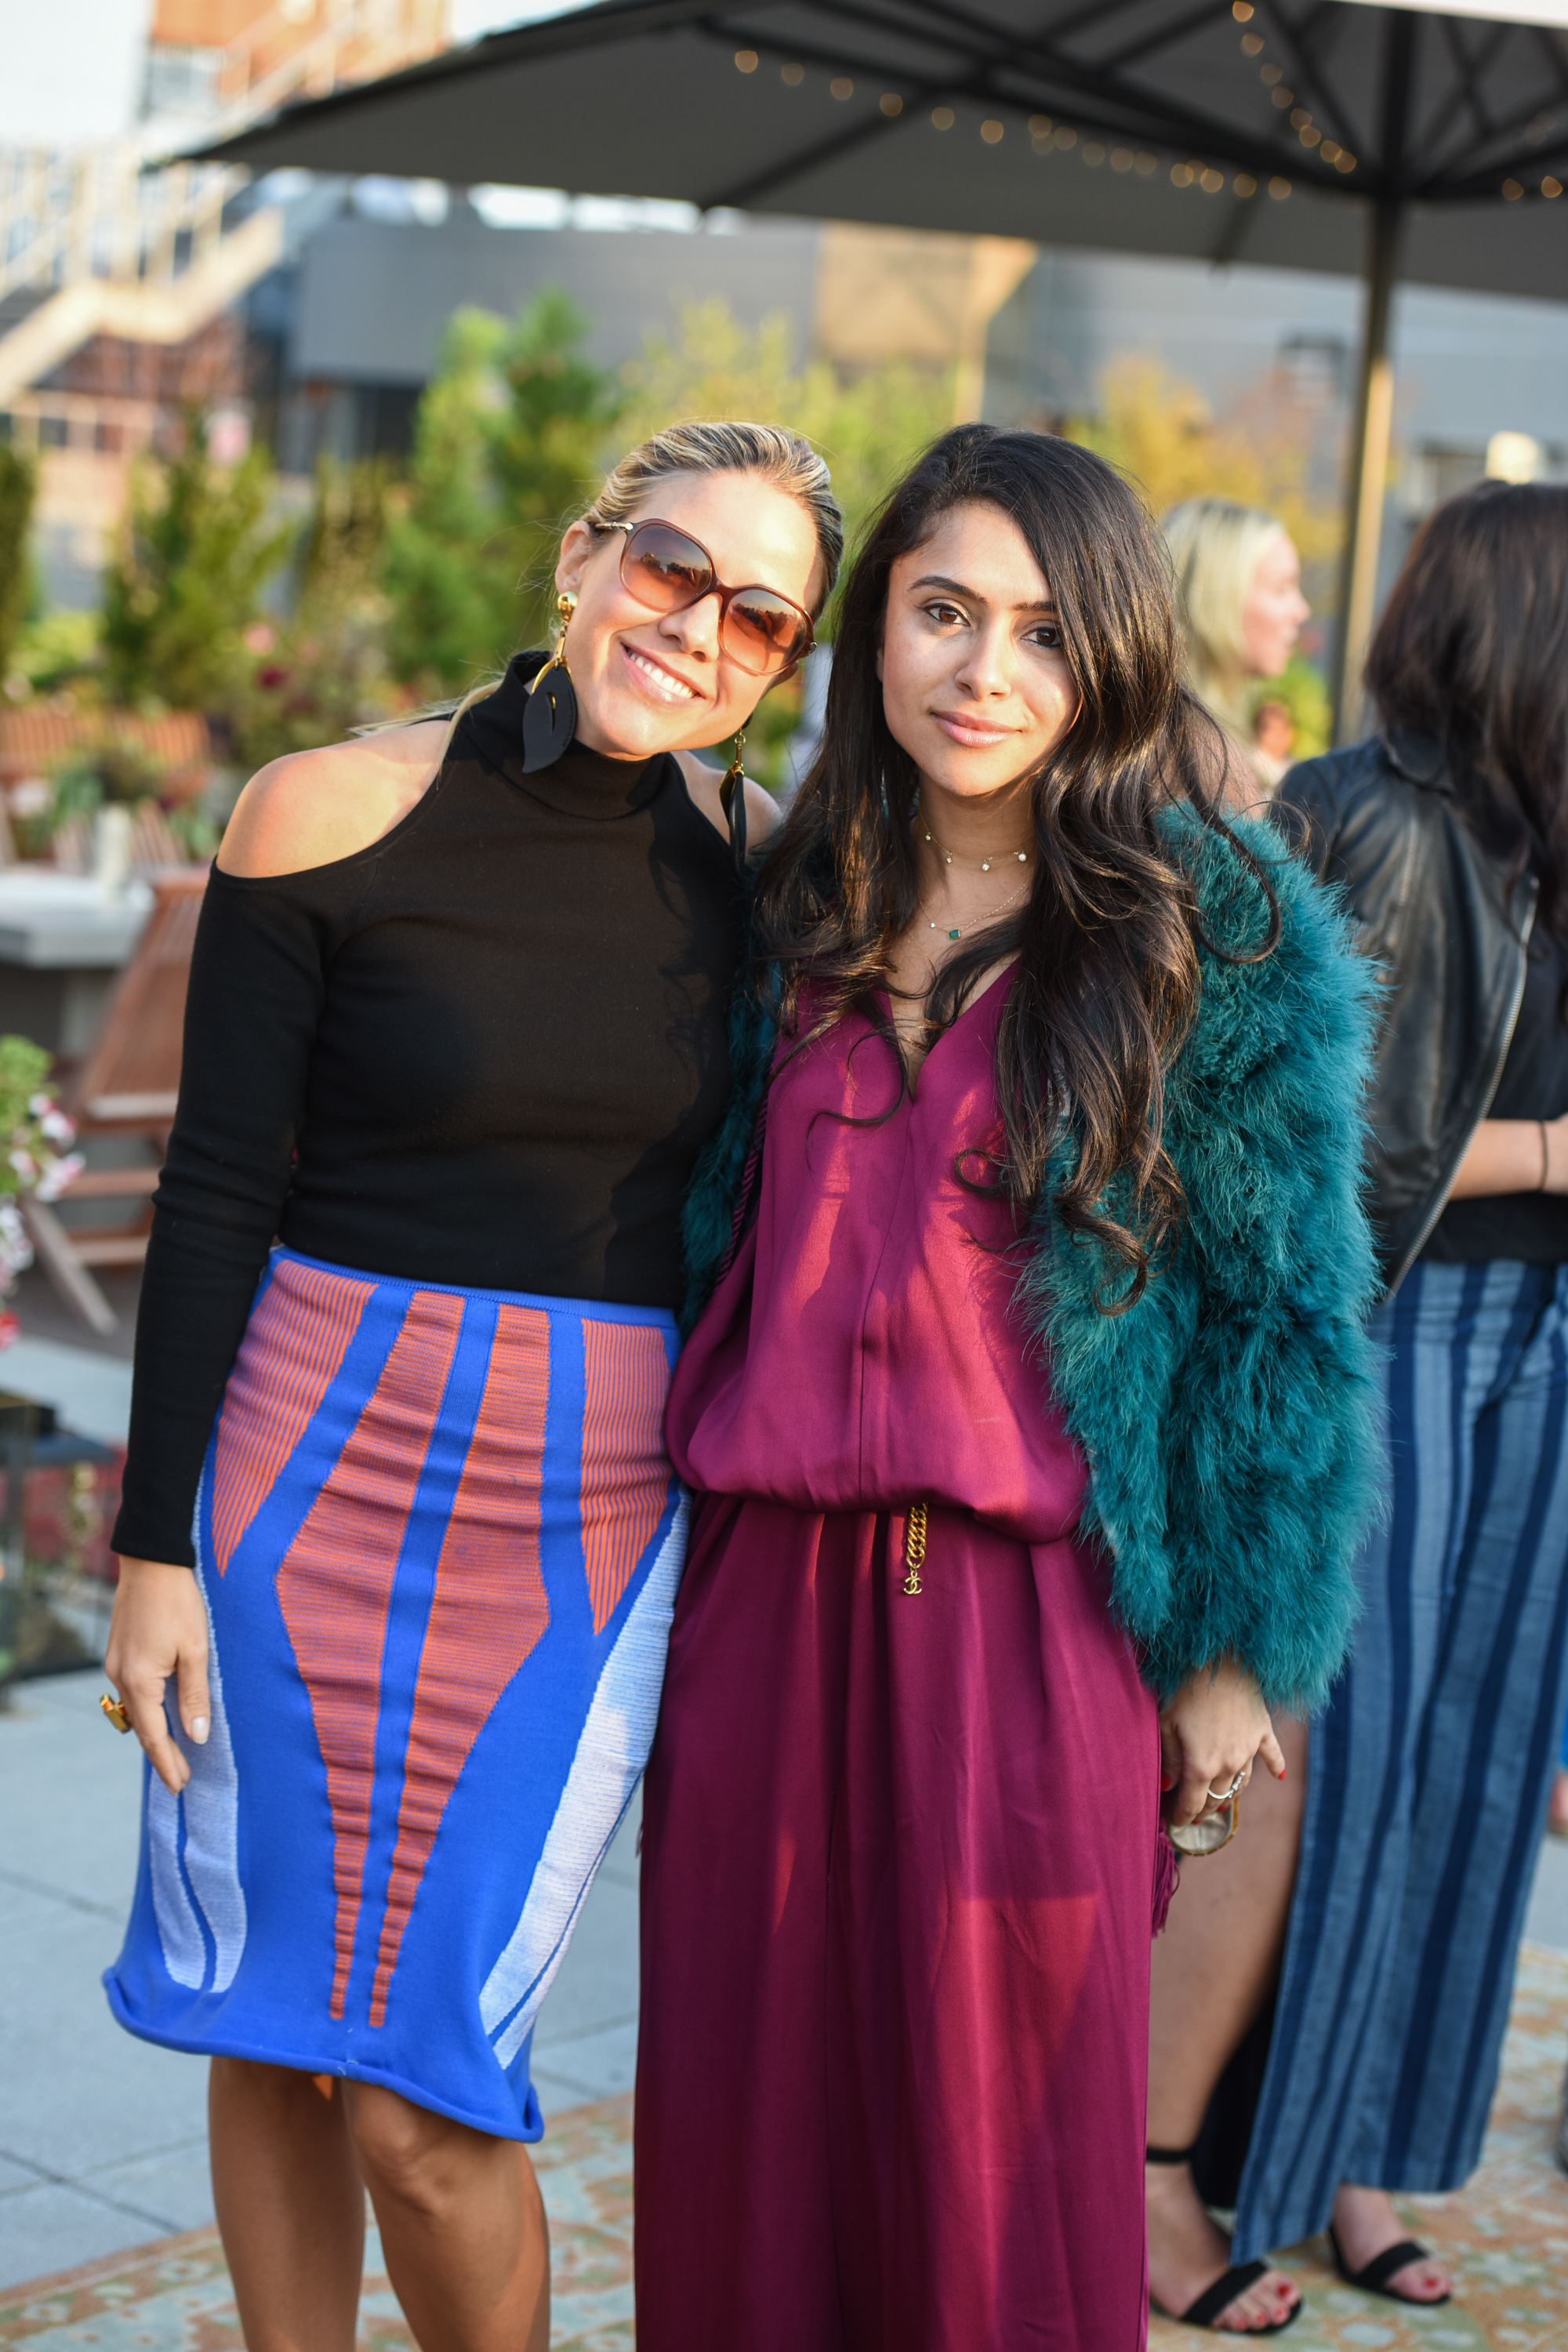 Vogue x Free People NYFW Rooftop Party #FPCOATCHECK - Lapalme Magazine